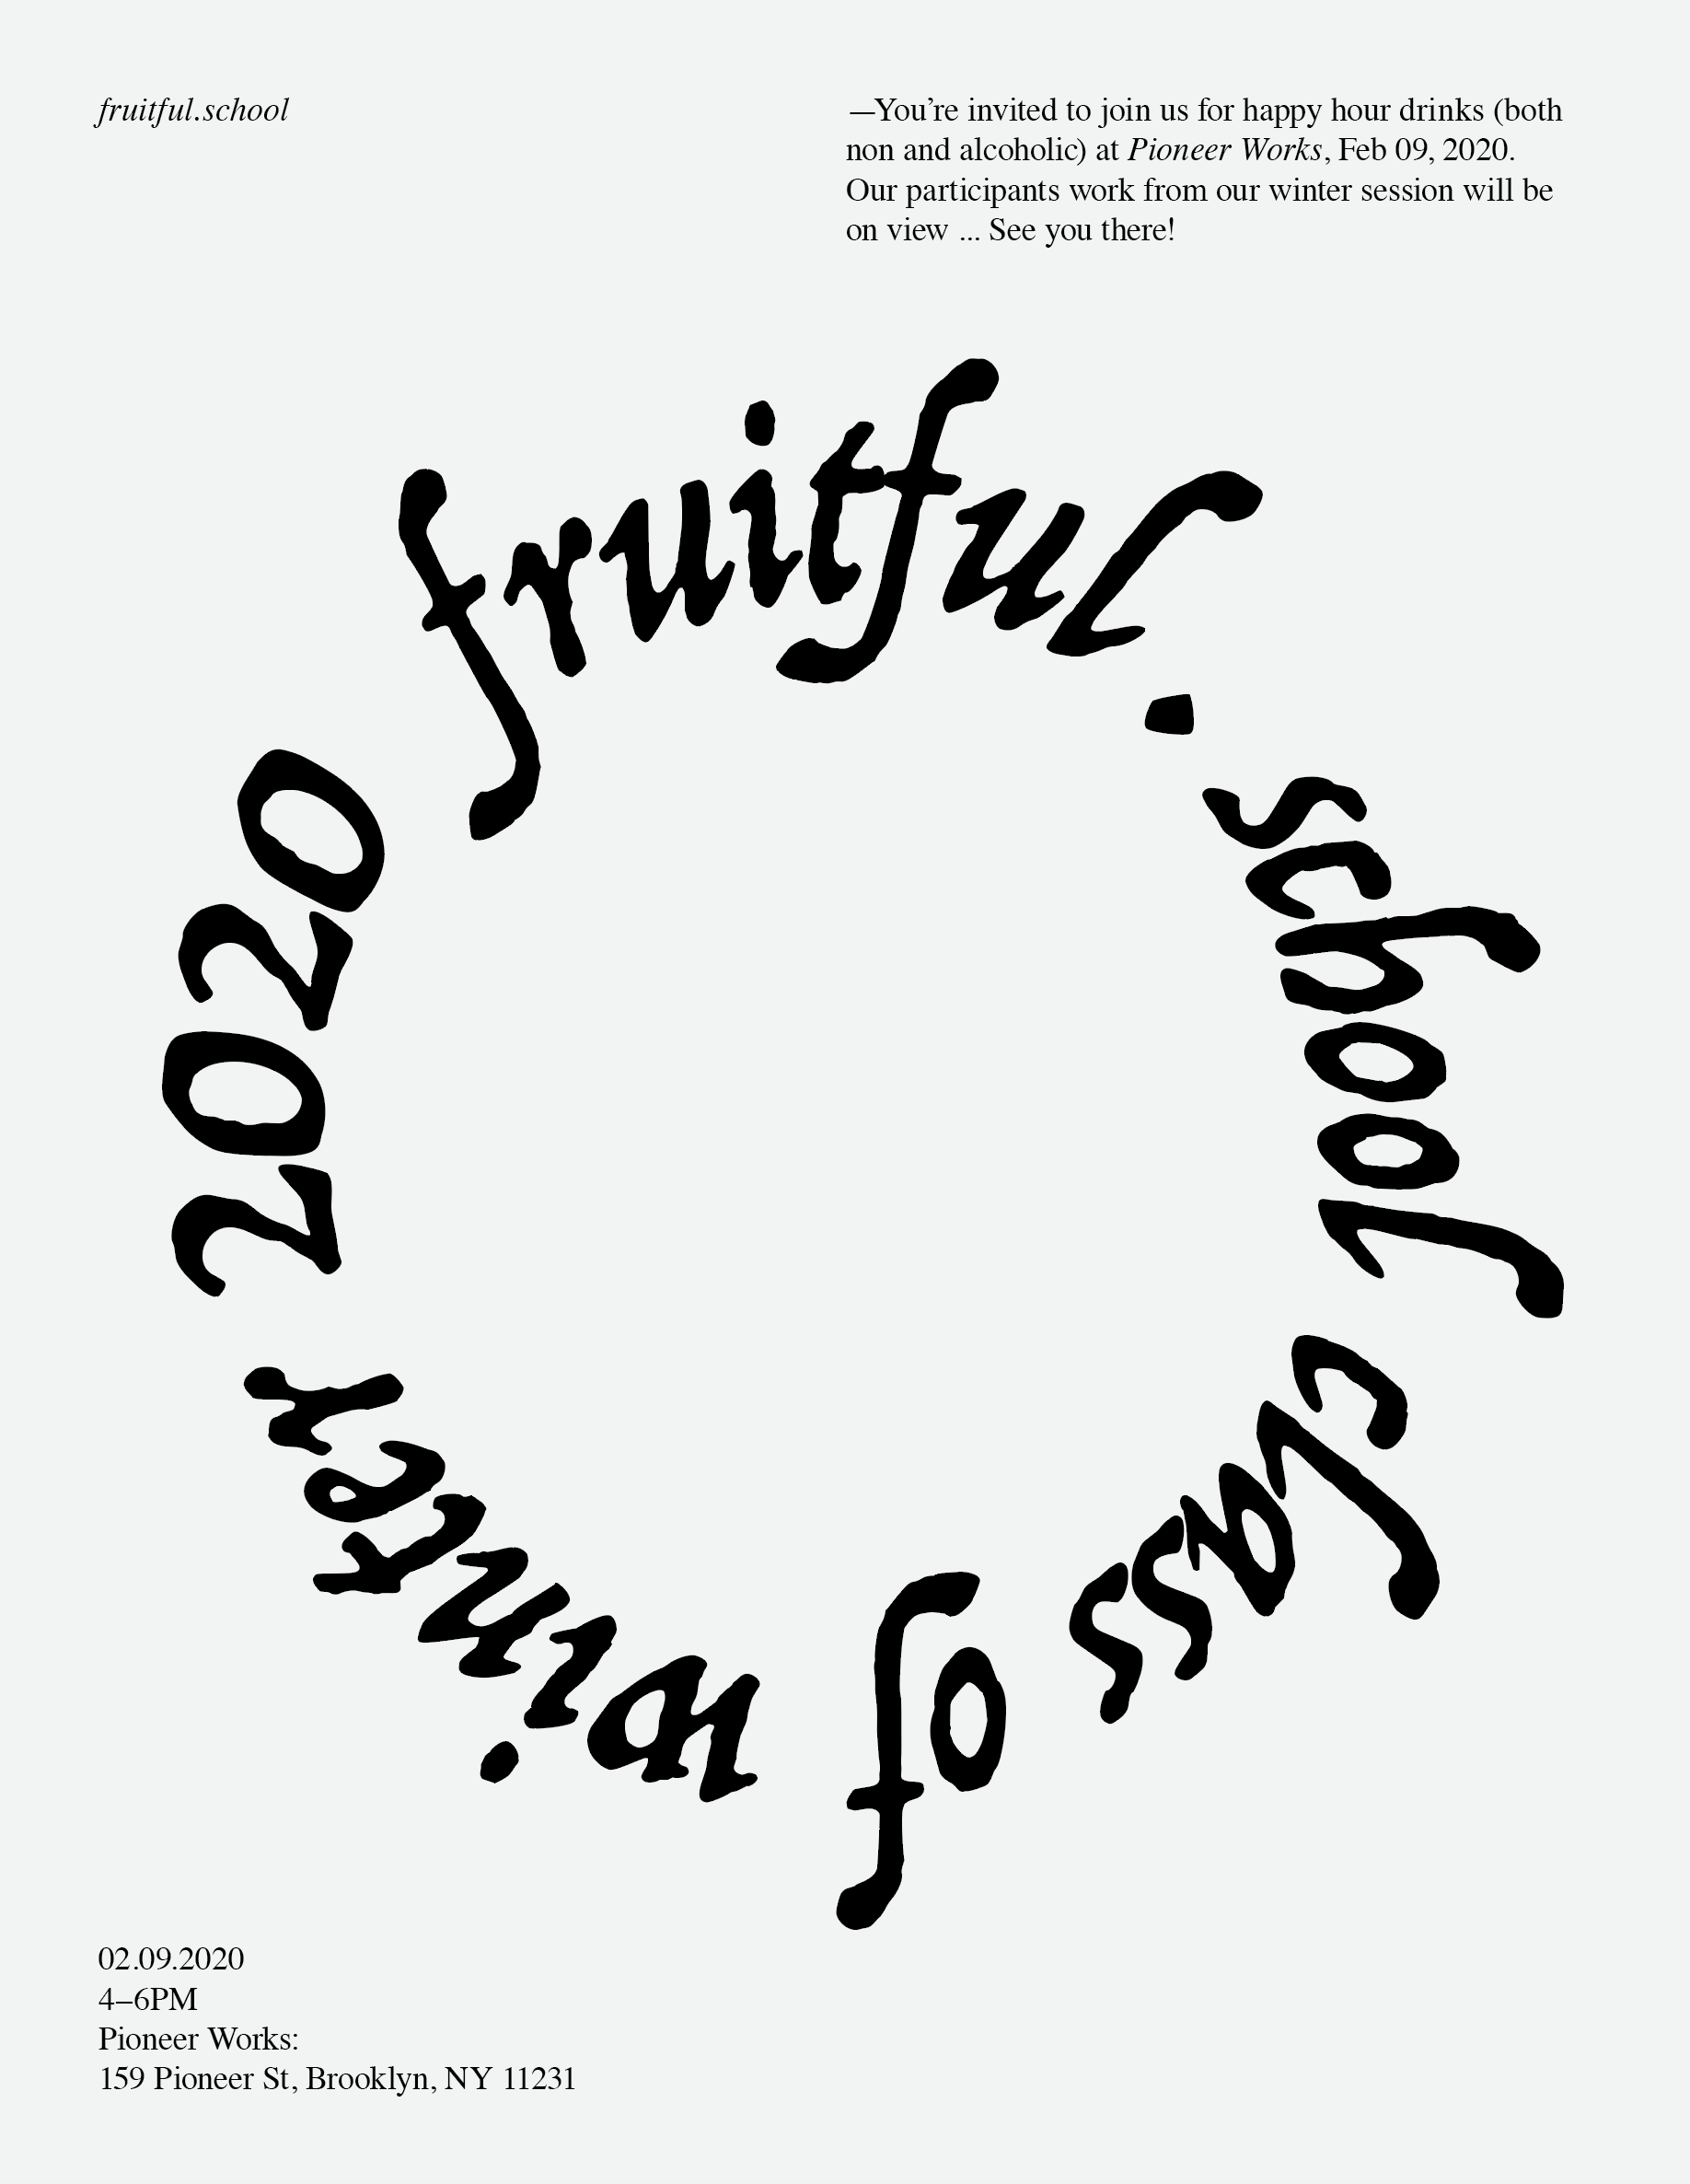 A calligraphic script typeface says 'fruitful school class of winter 2020' in a circular formation centered on the poster. The background is a very light gray, #f0f0f0 hex code. In the upper right corner, there is information: 'You're invited to join us for happy hour drinks (both non and alcoholic) at Pioneer Works on Sunday, February 9, 2020, 4-6pm. Our Fruitful School participants' work from the 6 week Winter 2020 program will be on view... see you there!' and in the lower left, '02.09.2020, 4–6pm, Pioneer Works: 159 Pioneer St, Brooklyn, NY 11231'.